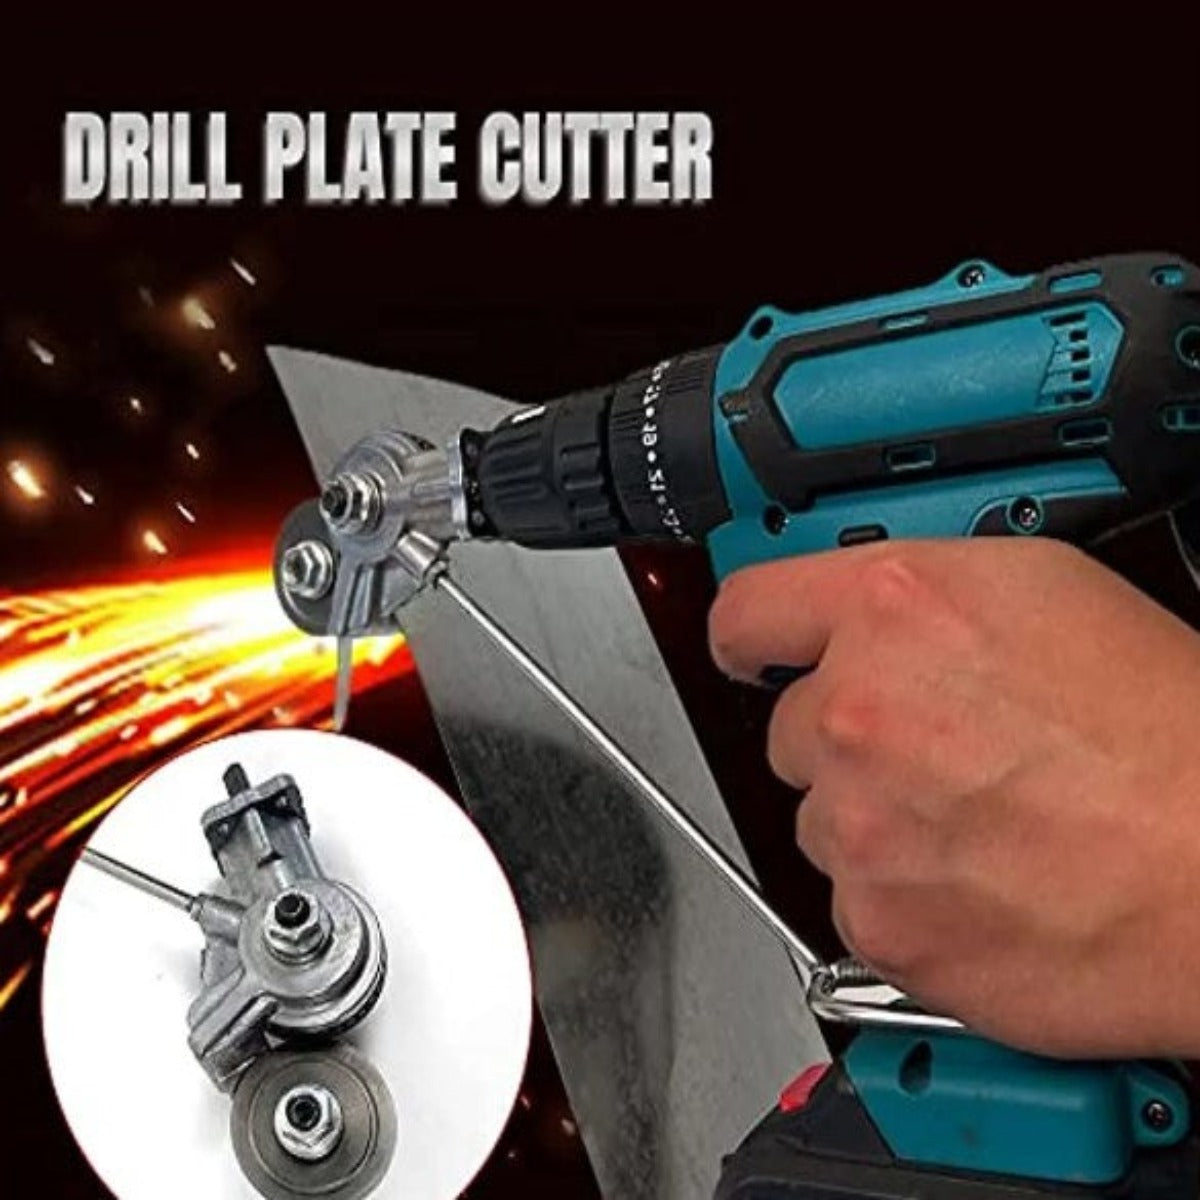 Electric Drill Plate Cutter in Action